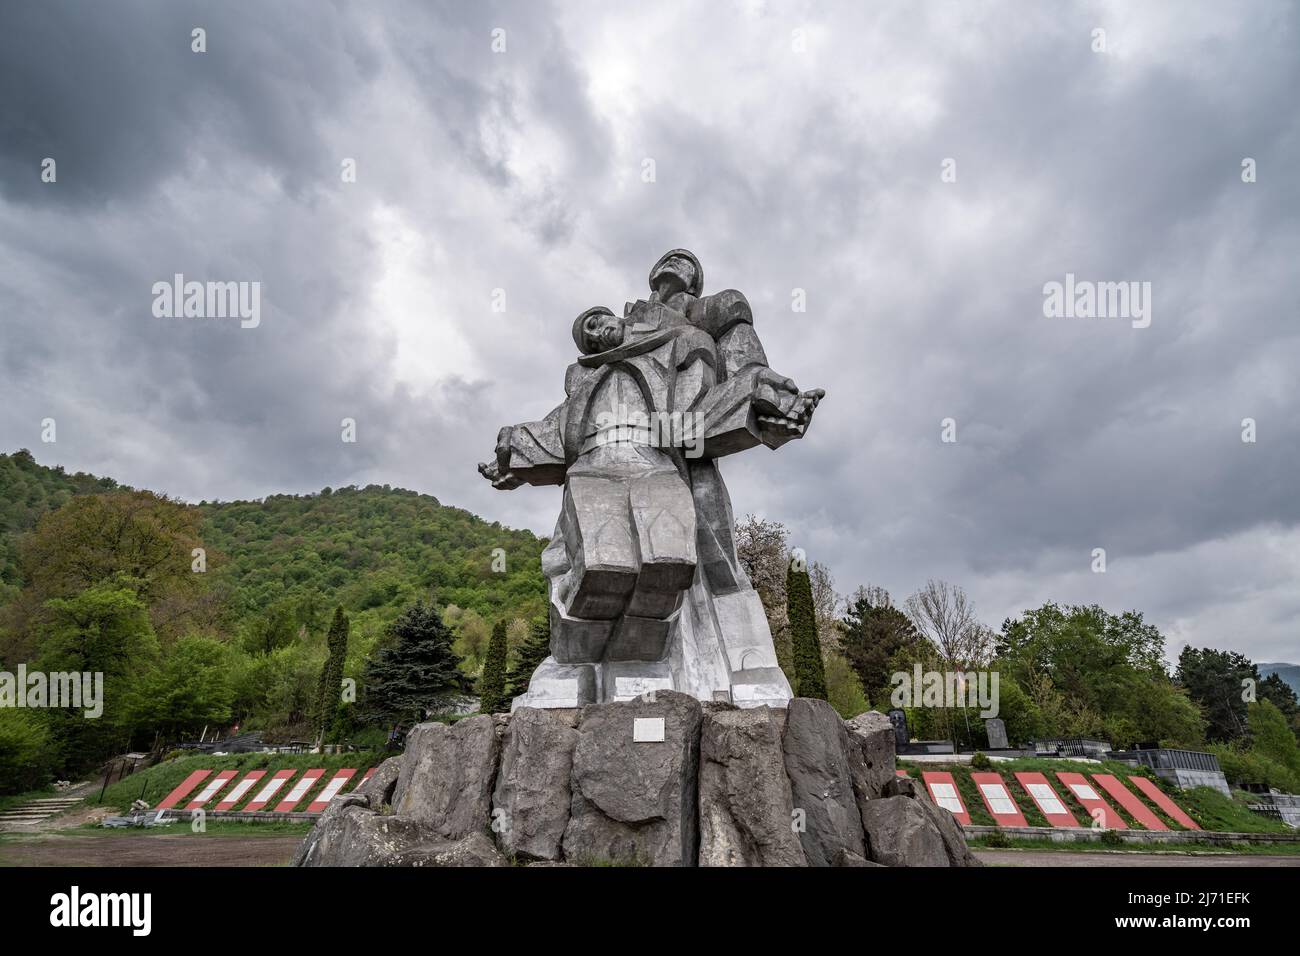 Dilijan, Armenia - May 4, 2022 - Dramatic clouds formation moving behind the Monument to the Great Patriotic War in Dilijan, Armenia Stock Photo